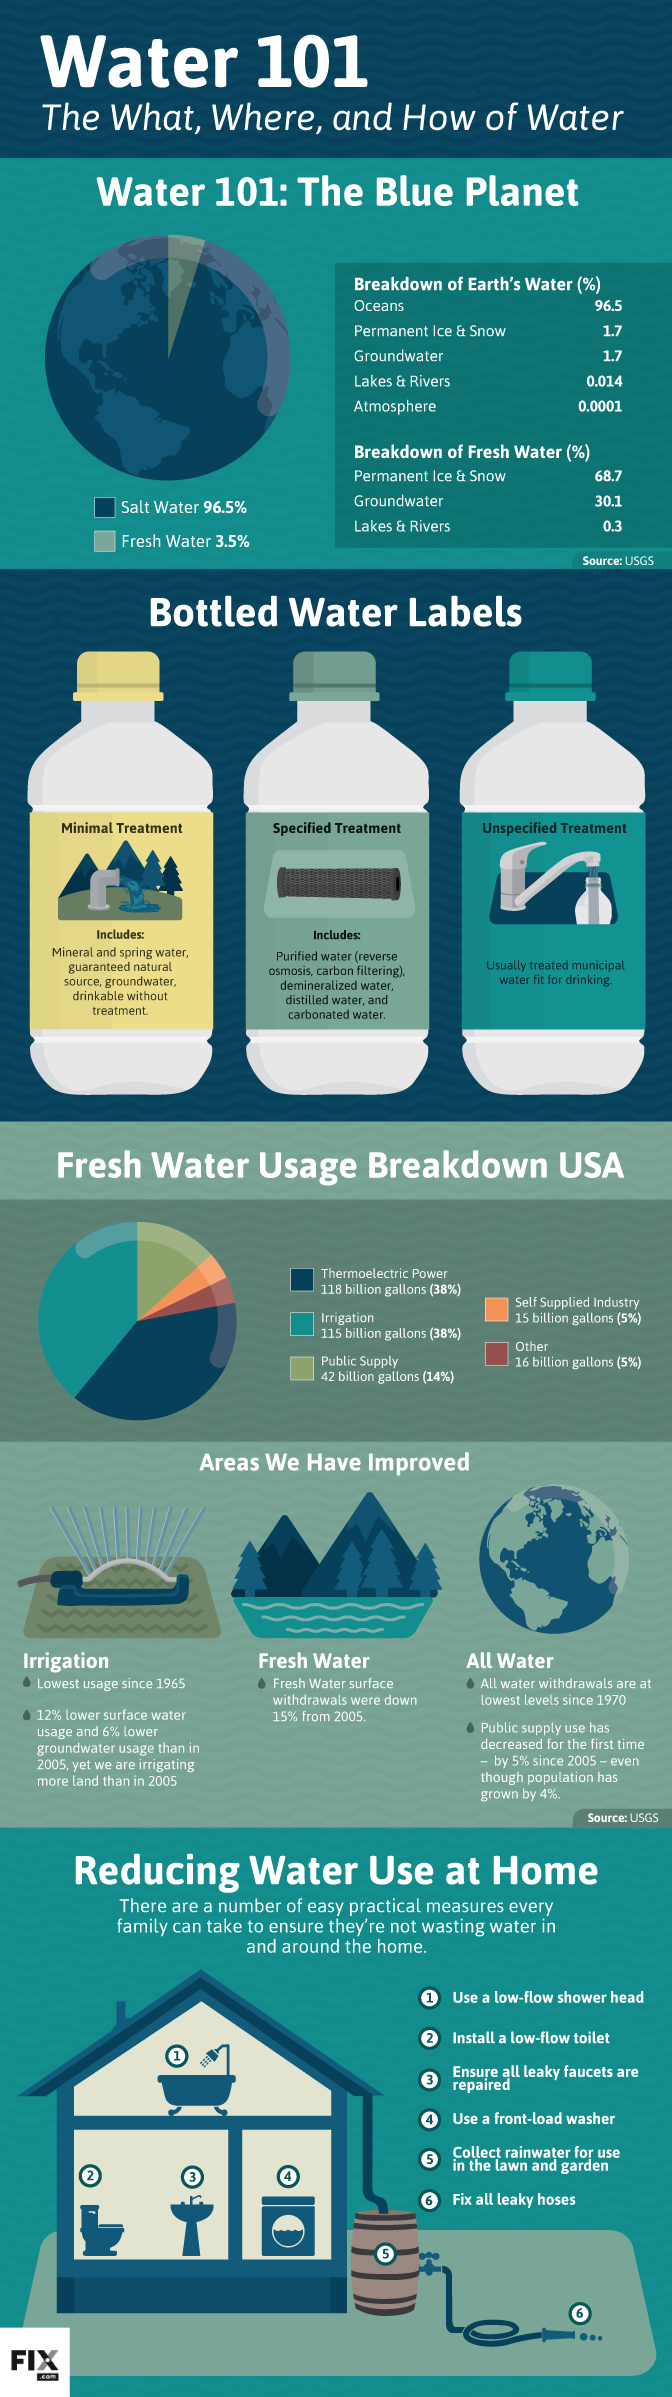 water 101: ways to conserve water at home infographic